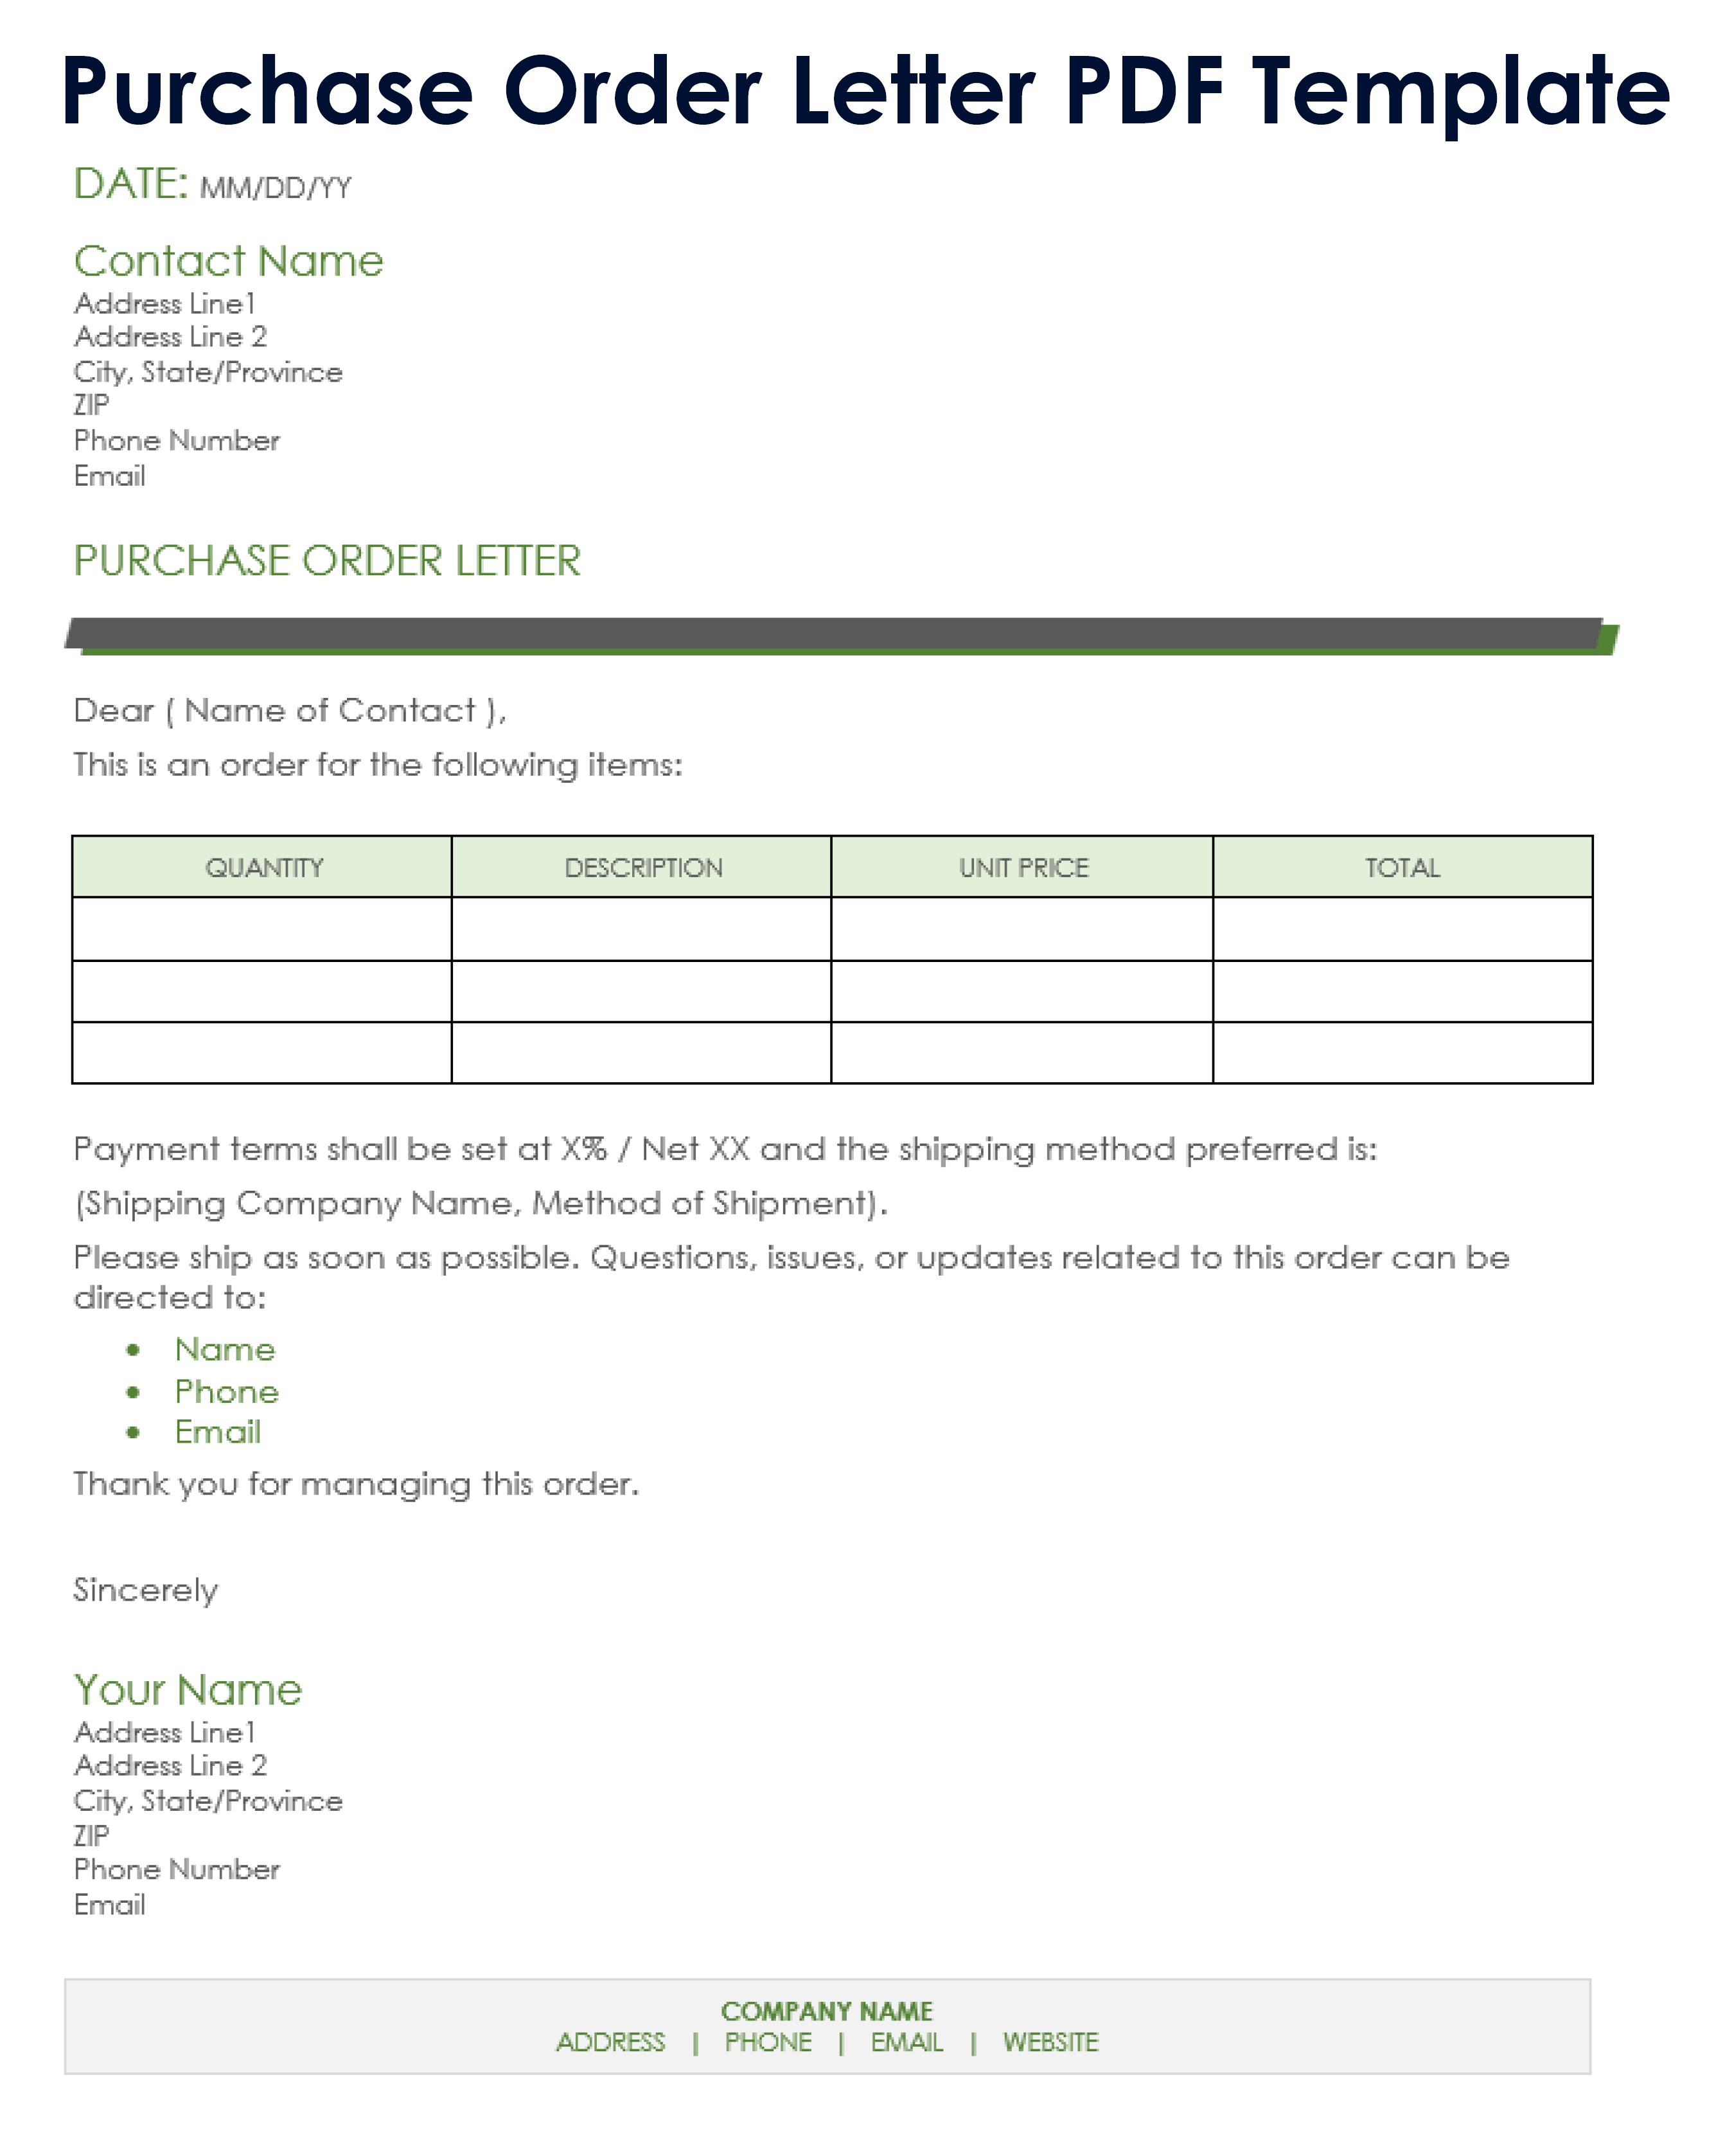 Purchase Order Letter Template